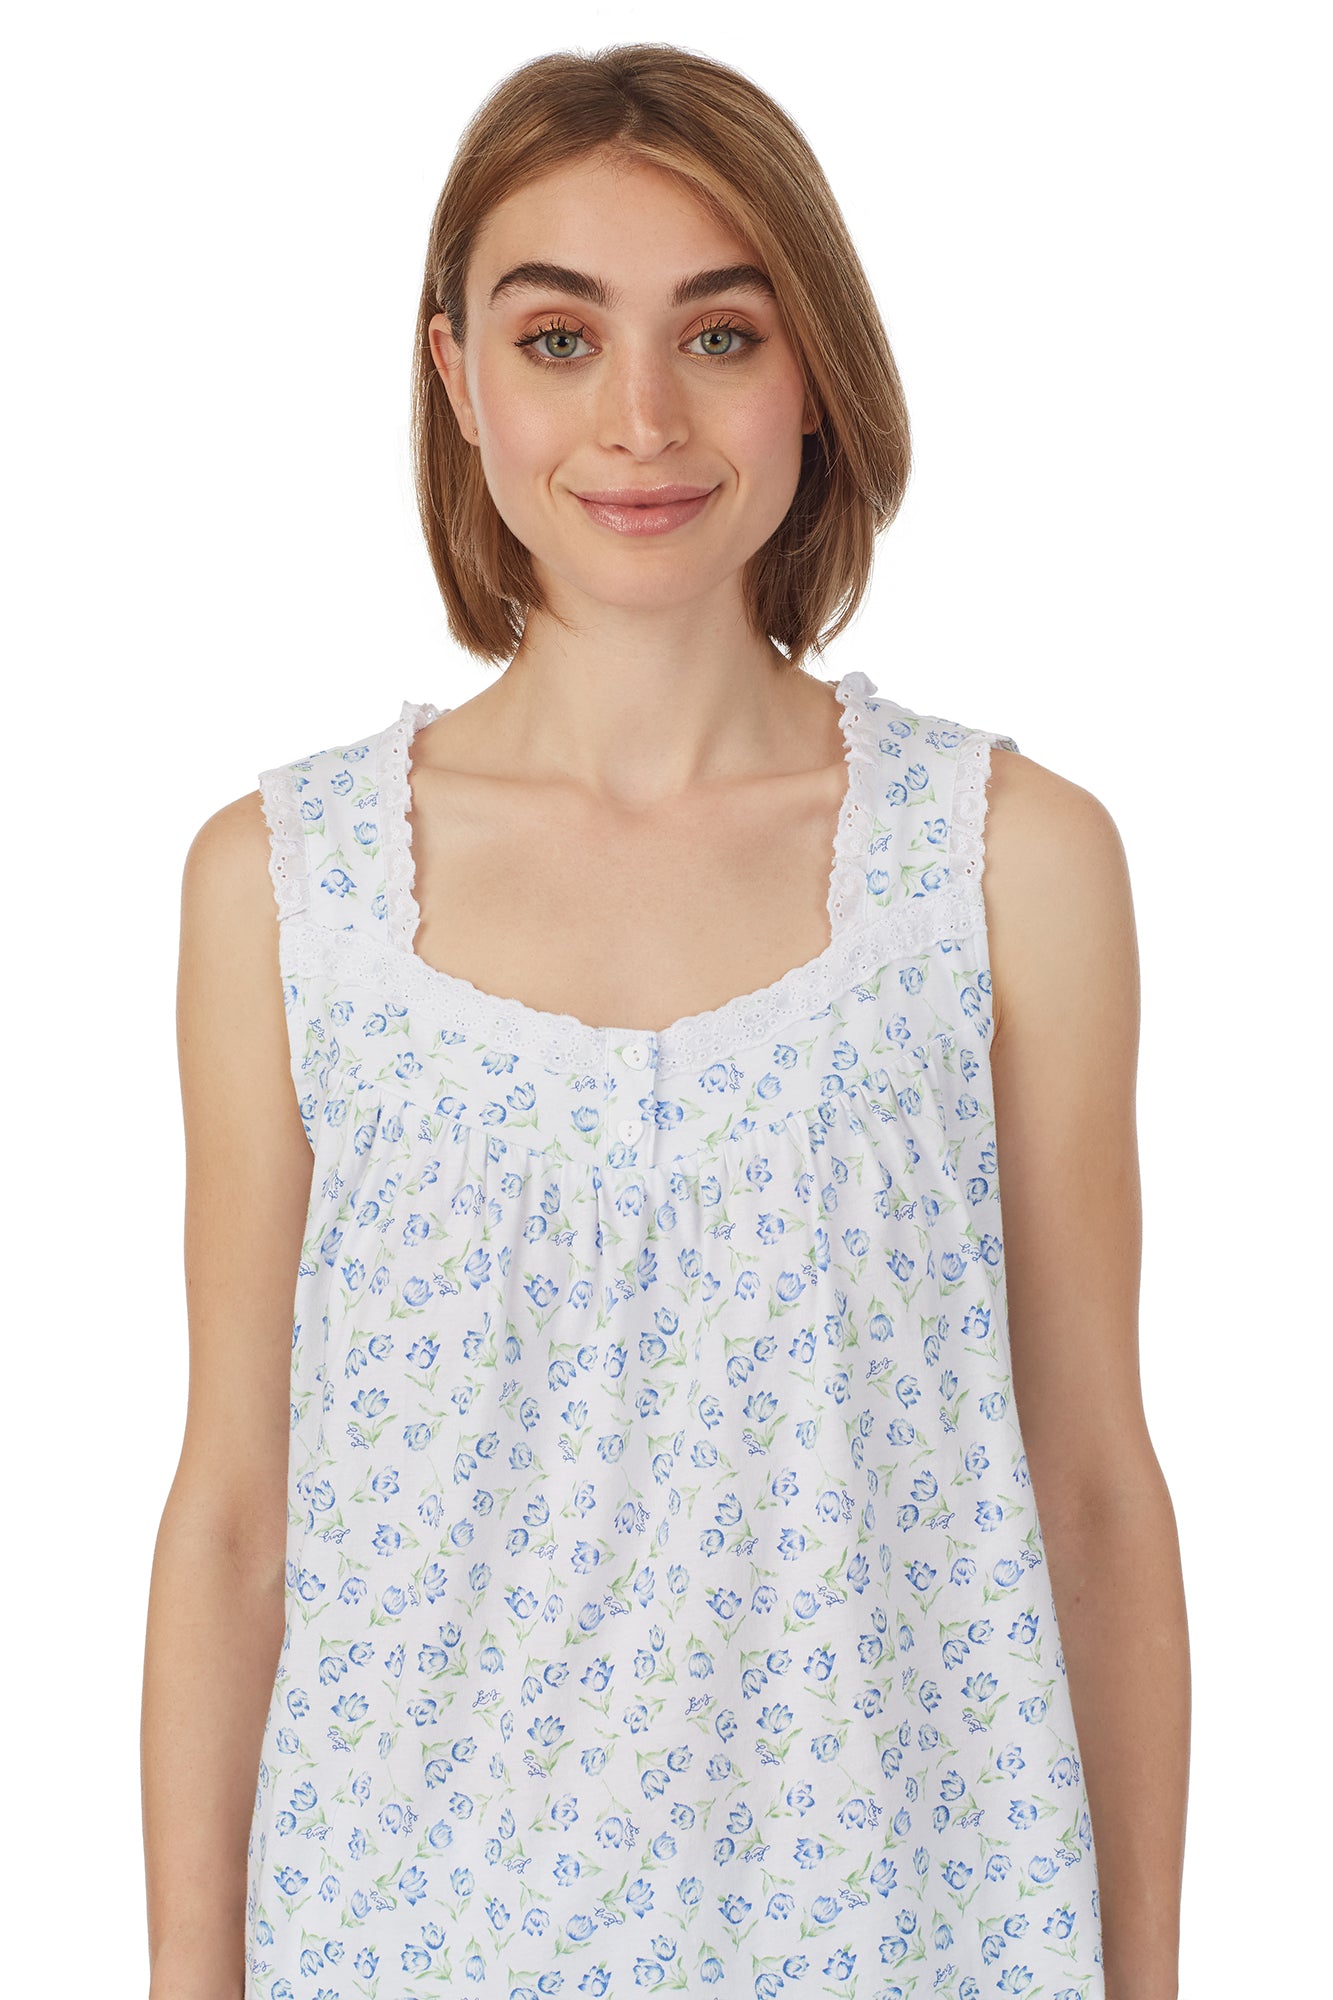 A lady wearing  a sleeveless knit shortie pajama with tulip pattern.